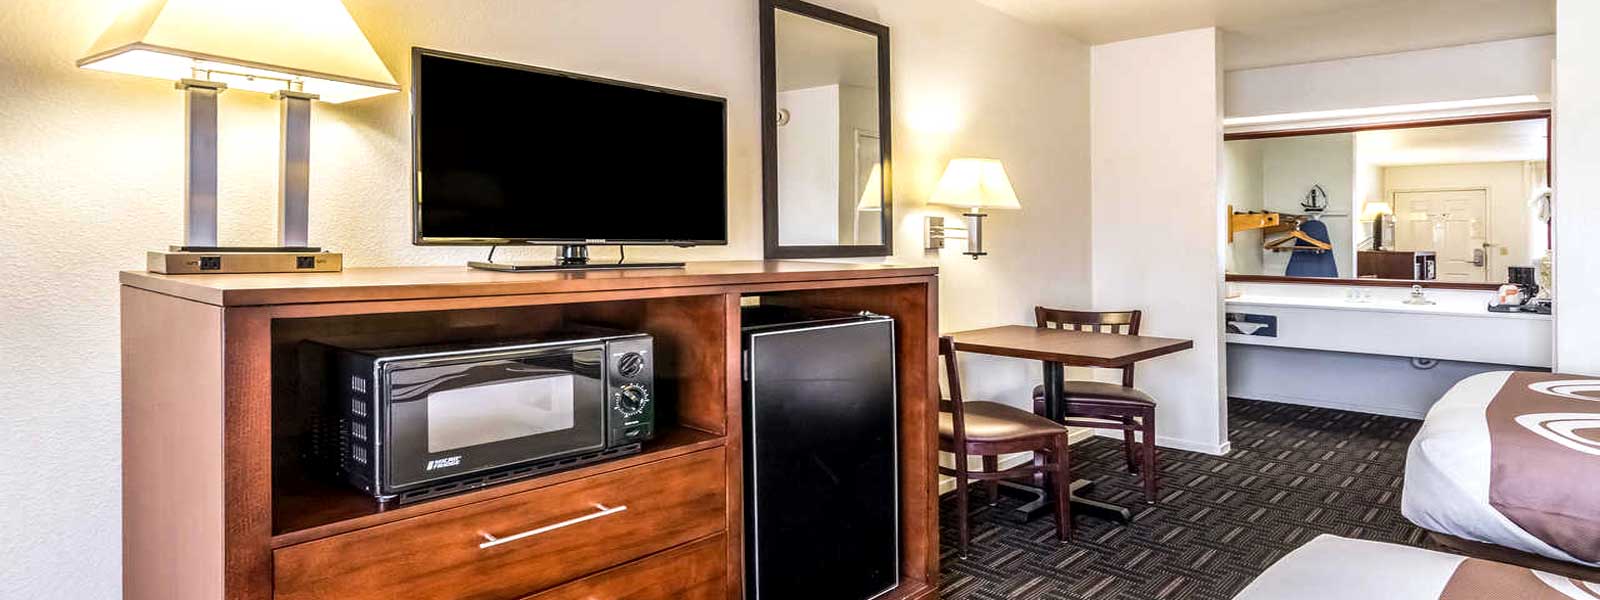 Quality Inn Downtown State University Affordable Lodging in Fresno California Clean Comfortable Rooms Newly Remodeled Close to Downtown